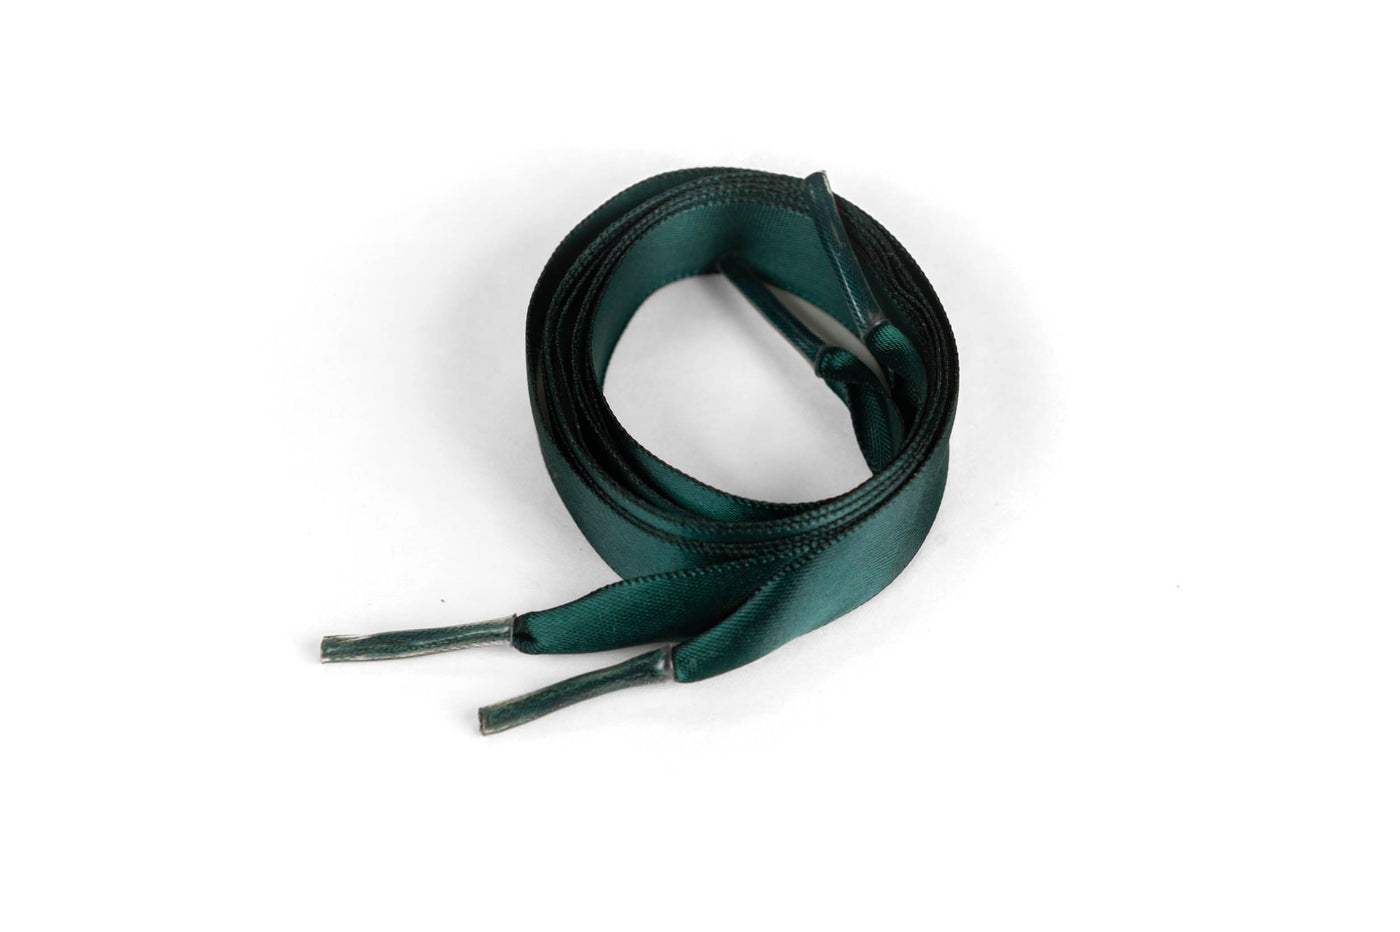 Satin Ribbon 5/8" Premium Quality Shoelaces - 54" Inch Length Teal